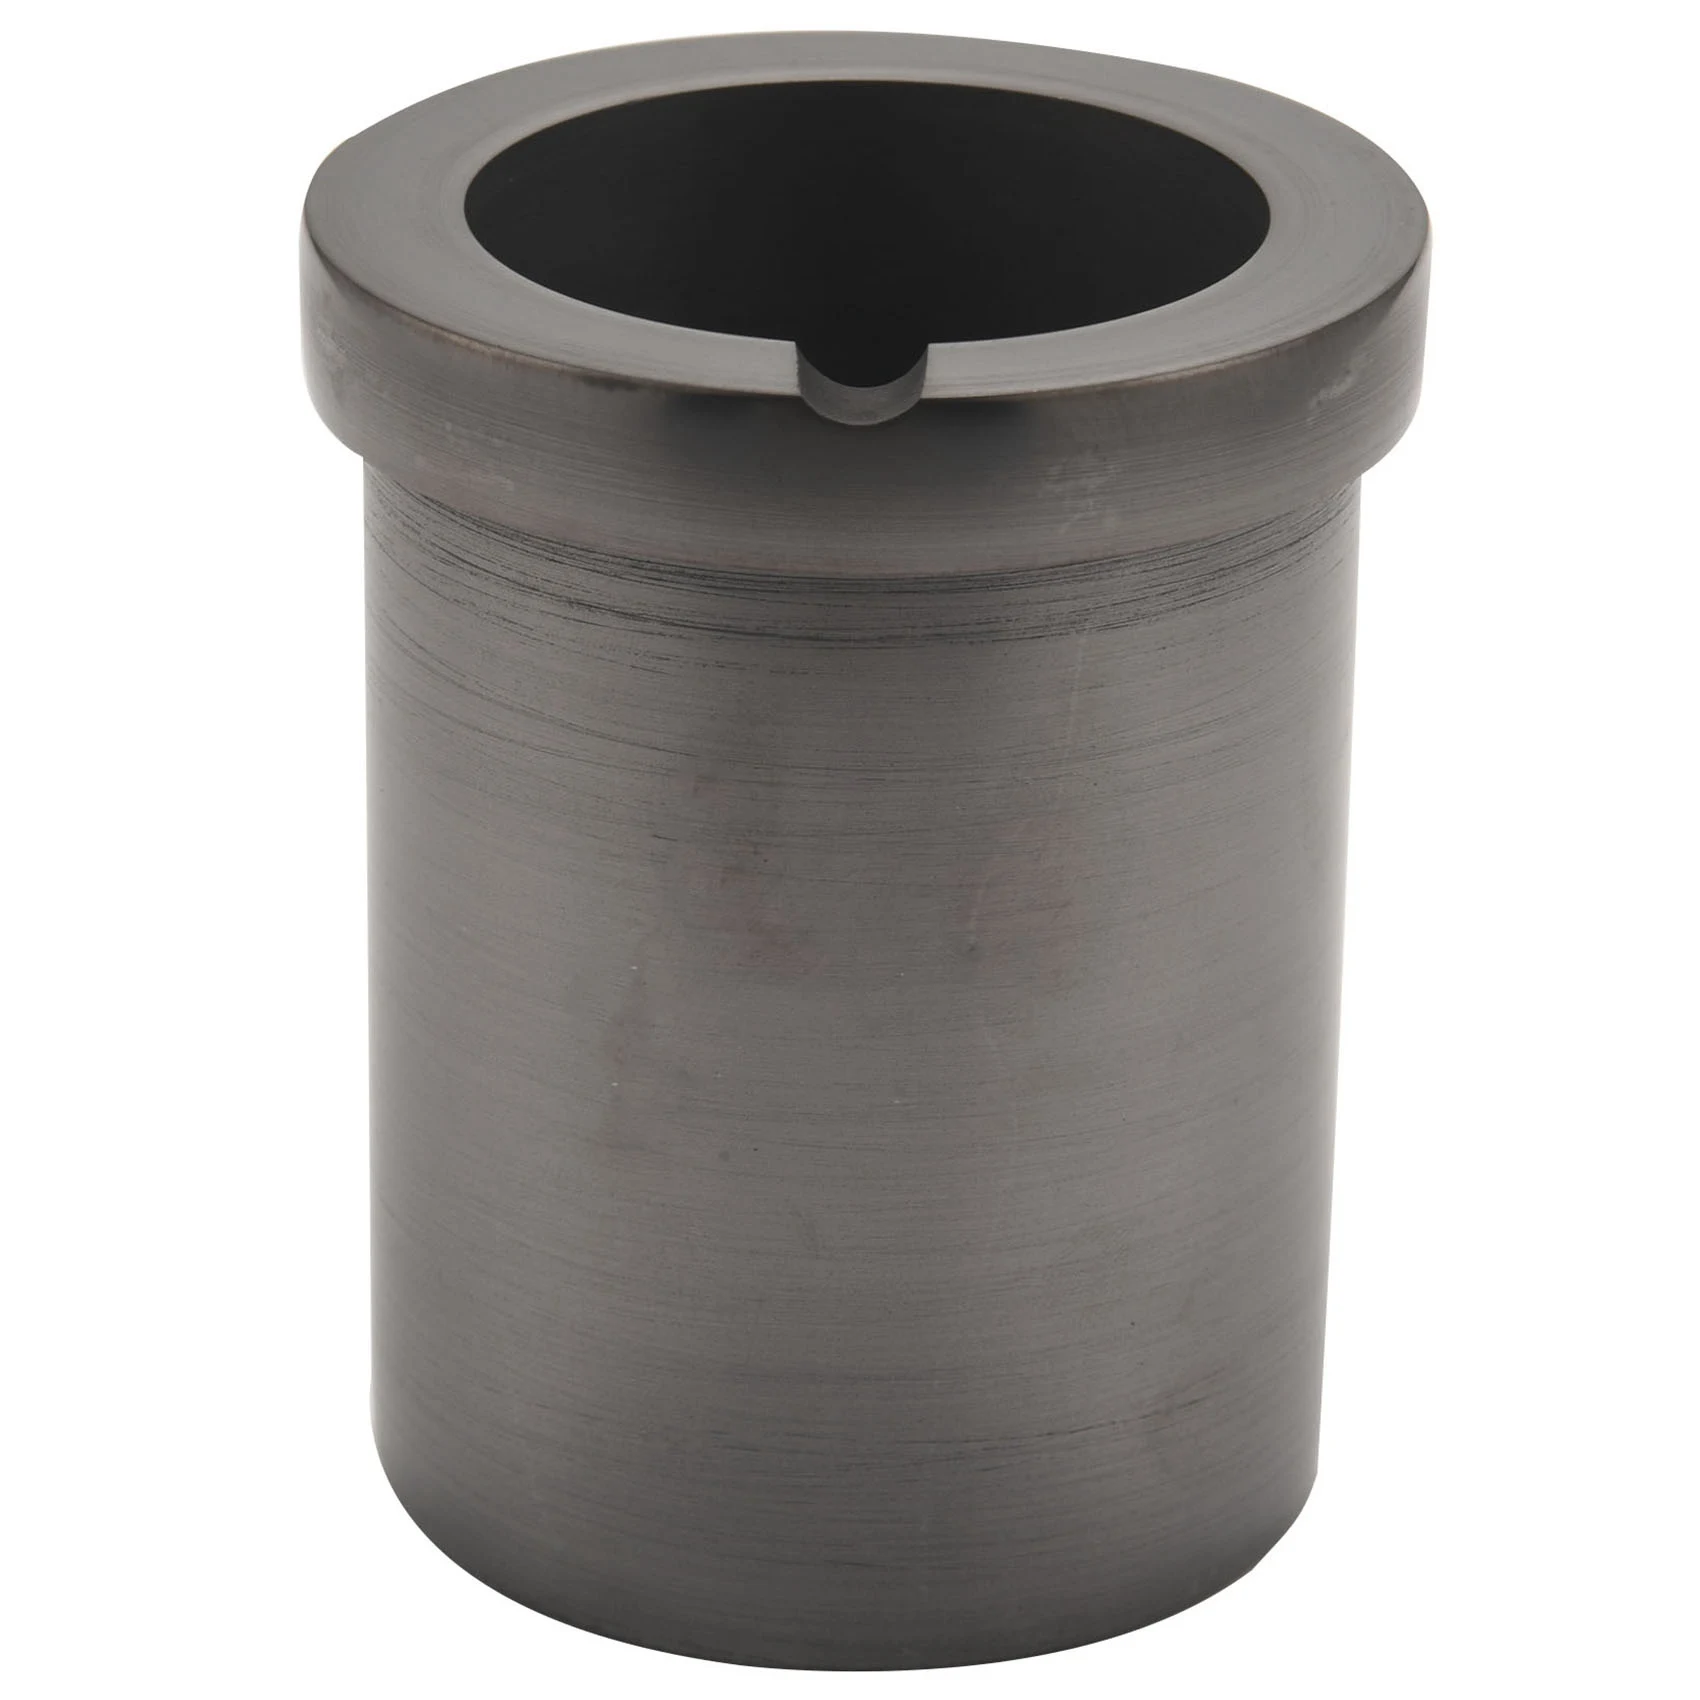 

High-Purity Melting 3Kg Graphite Crucible Good Heat Transfer Performance For High-Temperature Gold And Silver Metal Smelting